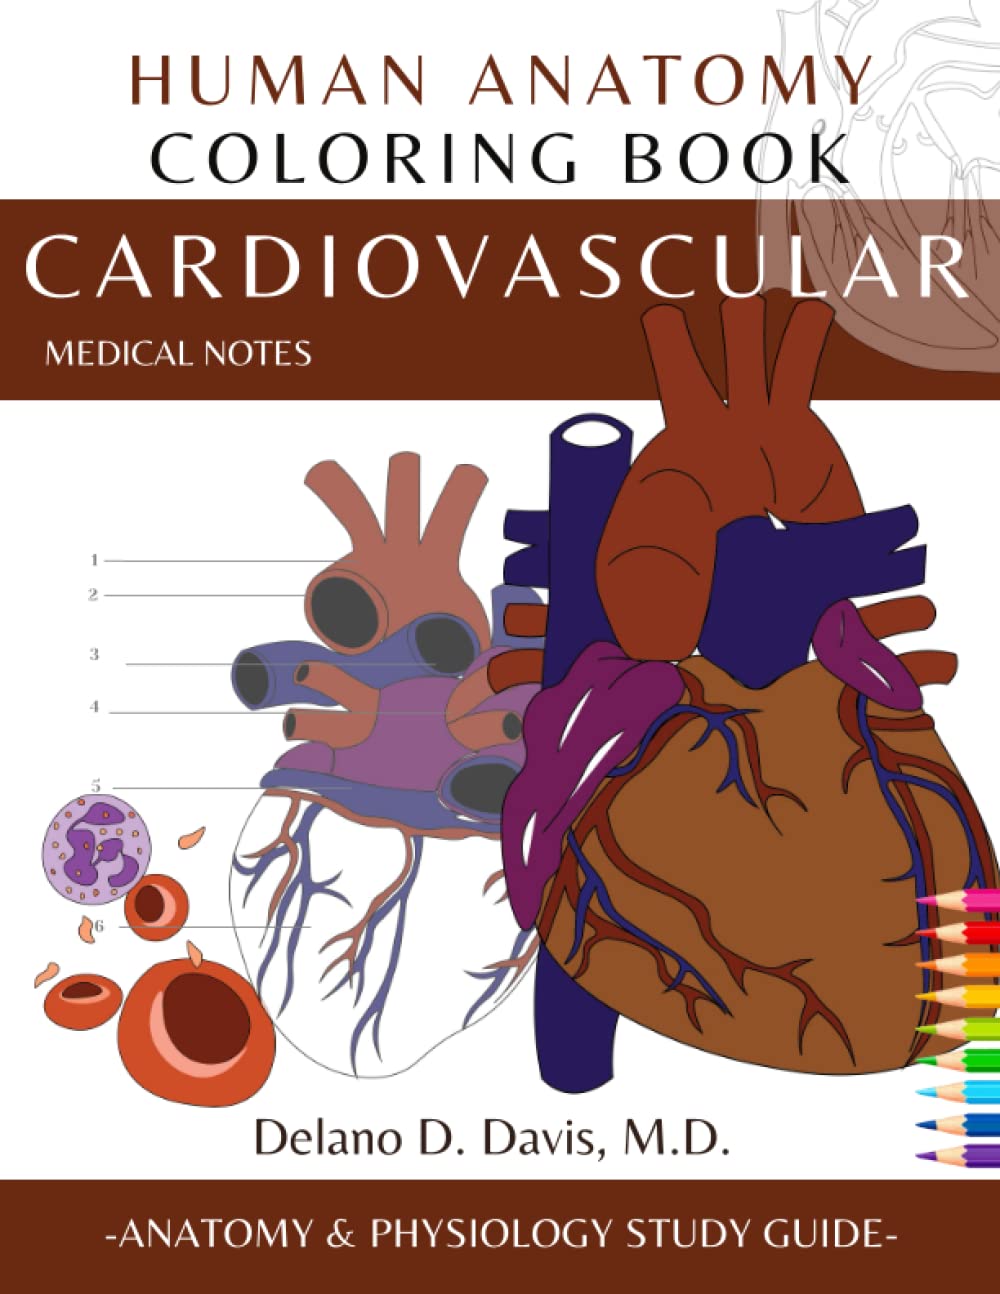 Detailed　Illustrations　chính　Physiology　Medical　Medical　Mua　Students　with　hãng　Amazon　Human　2023　Anatomy　Cardiovascular　Nursing　Book:　Anatomy　Coloring　and　Mỹ　Notes:　Guide　and　trên　Giaonhan247　Study　For